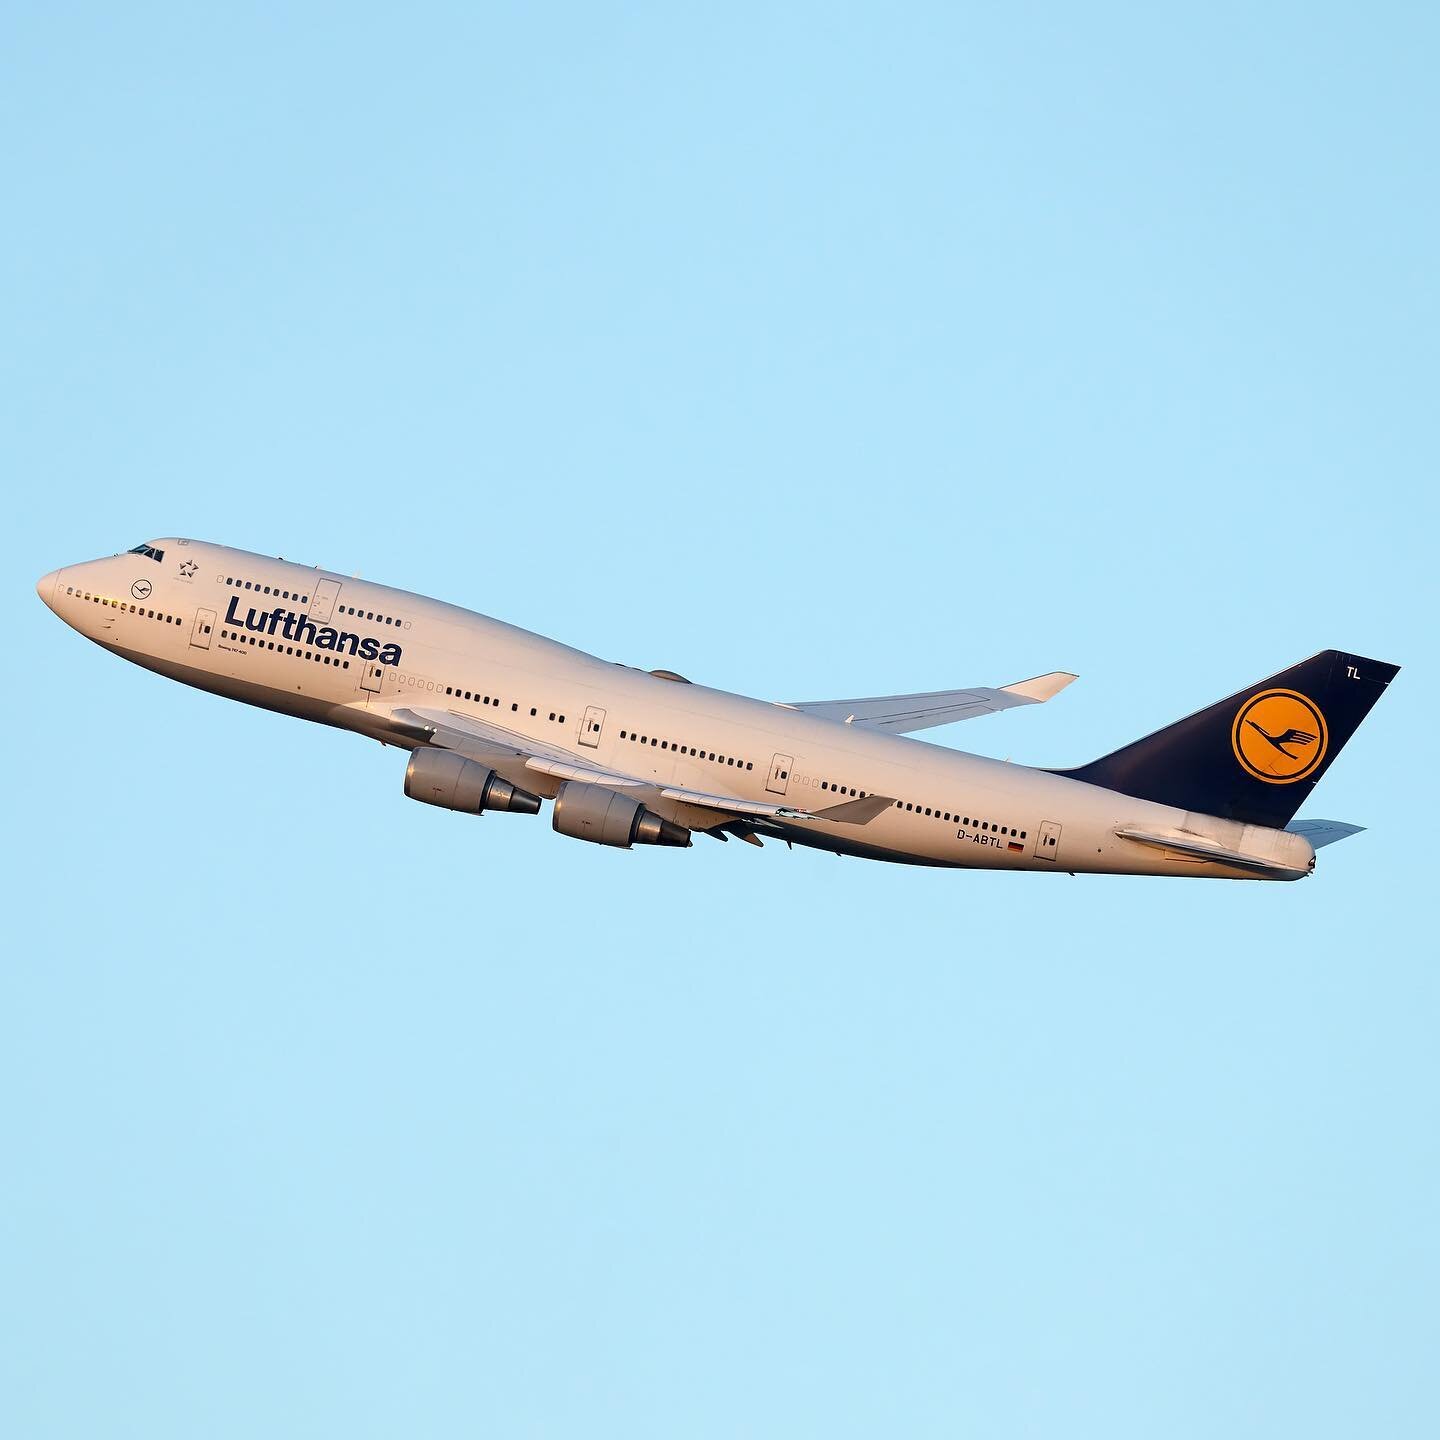 JFK recently welcomed back Lufthansa&rsquo;s 747, with a classic -400! Glad at I caught the Lufty Queen recently at last light on the bank! 
&bull;
Airport: JFK &bull; Canarsie
Date: November 23, 2021 &bull;
Sony &alpha; Gear: &alpha;1 + 200-600mm &b